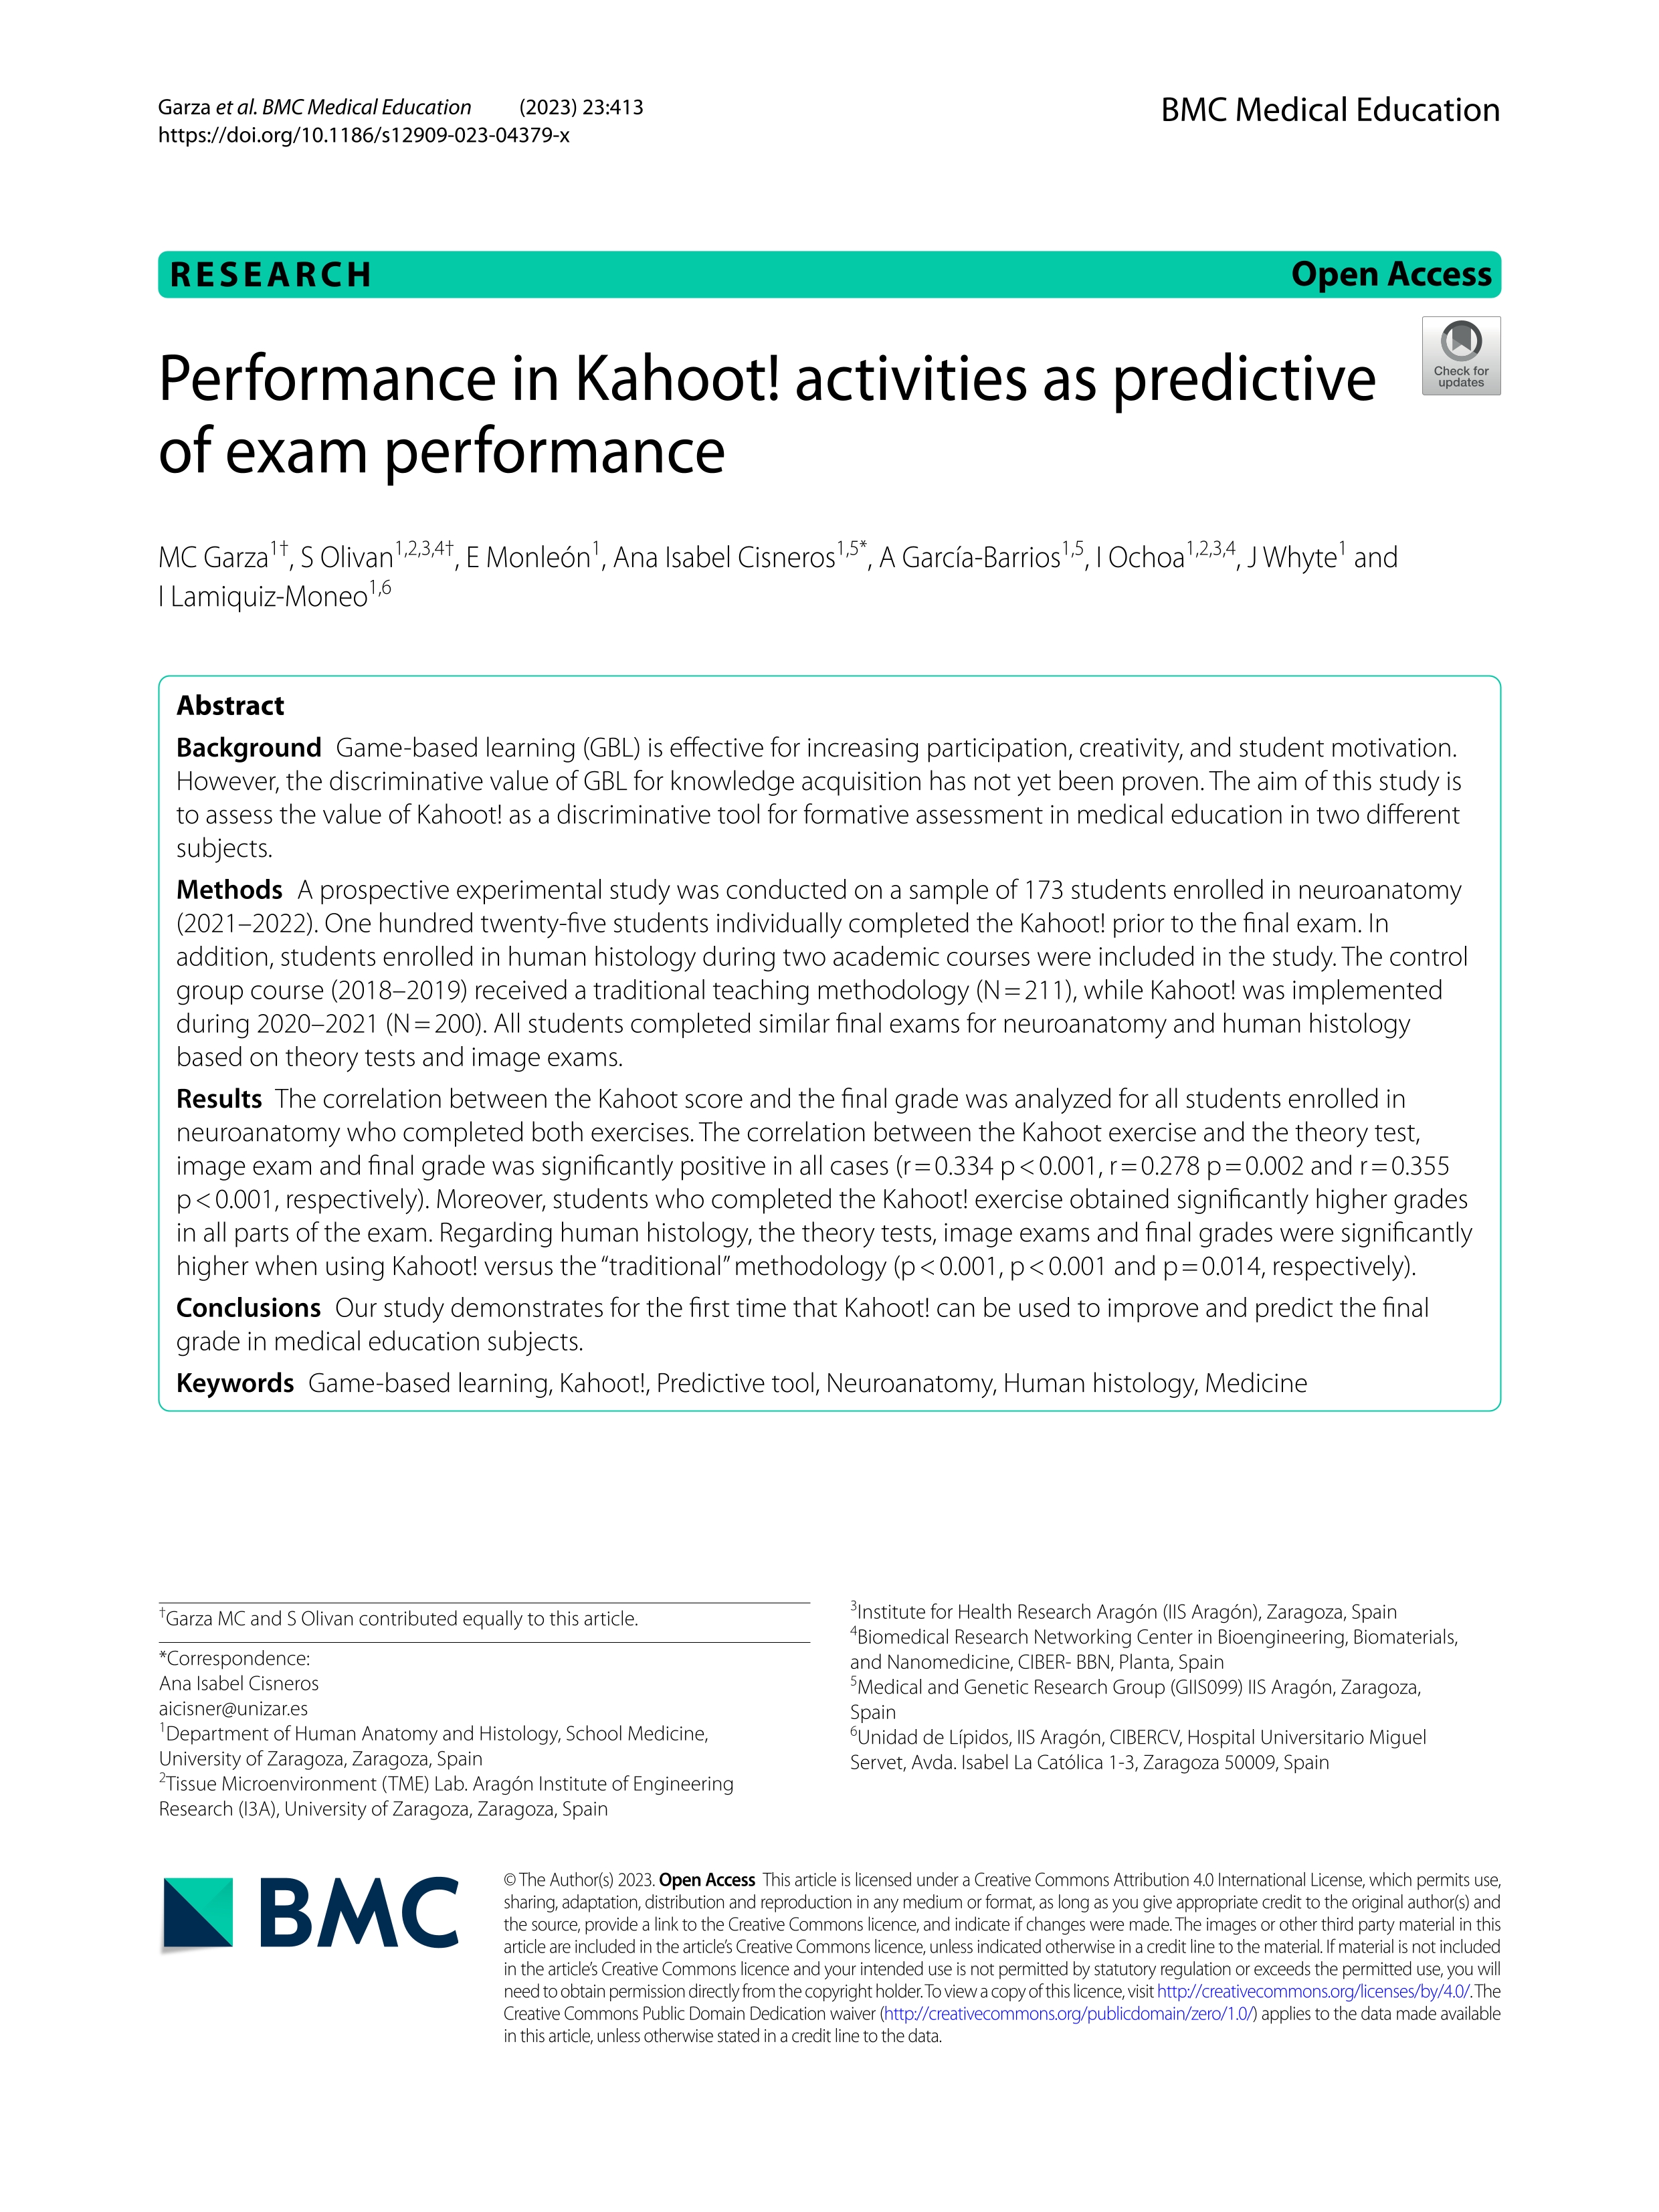 Performance in Kahoot! activities as predictive of exam performance